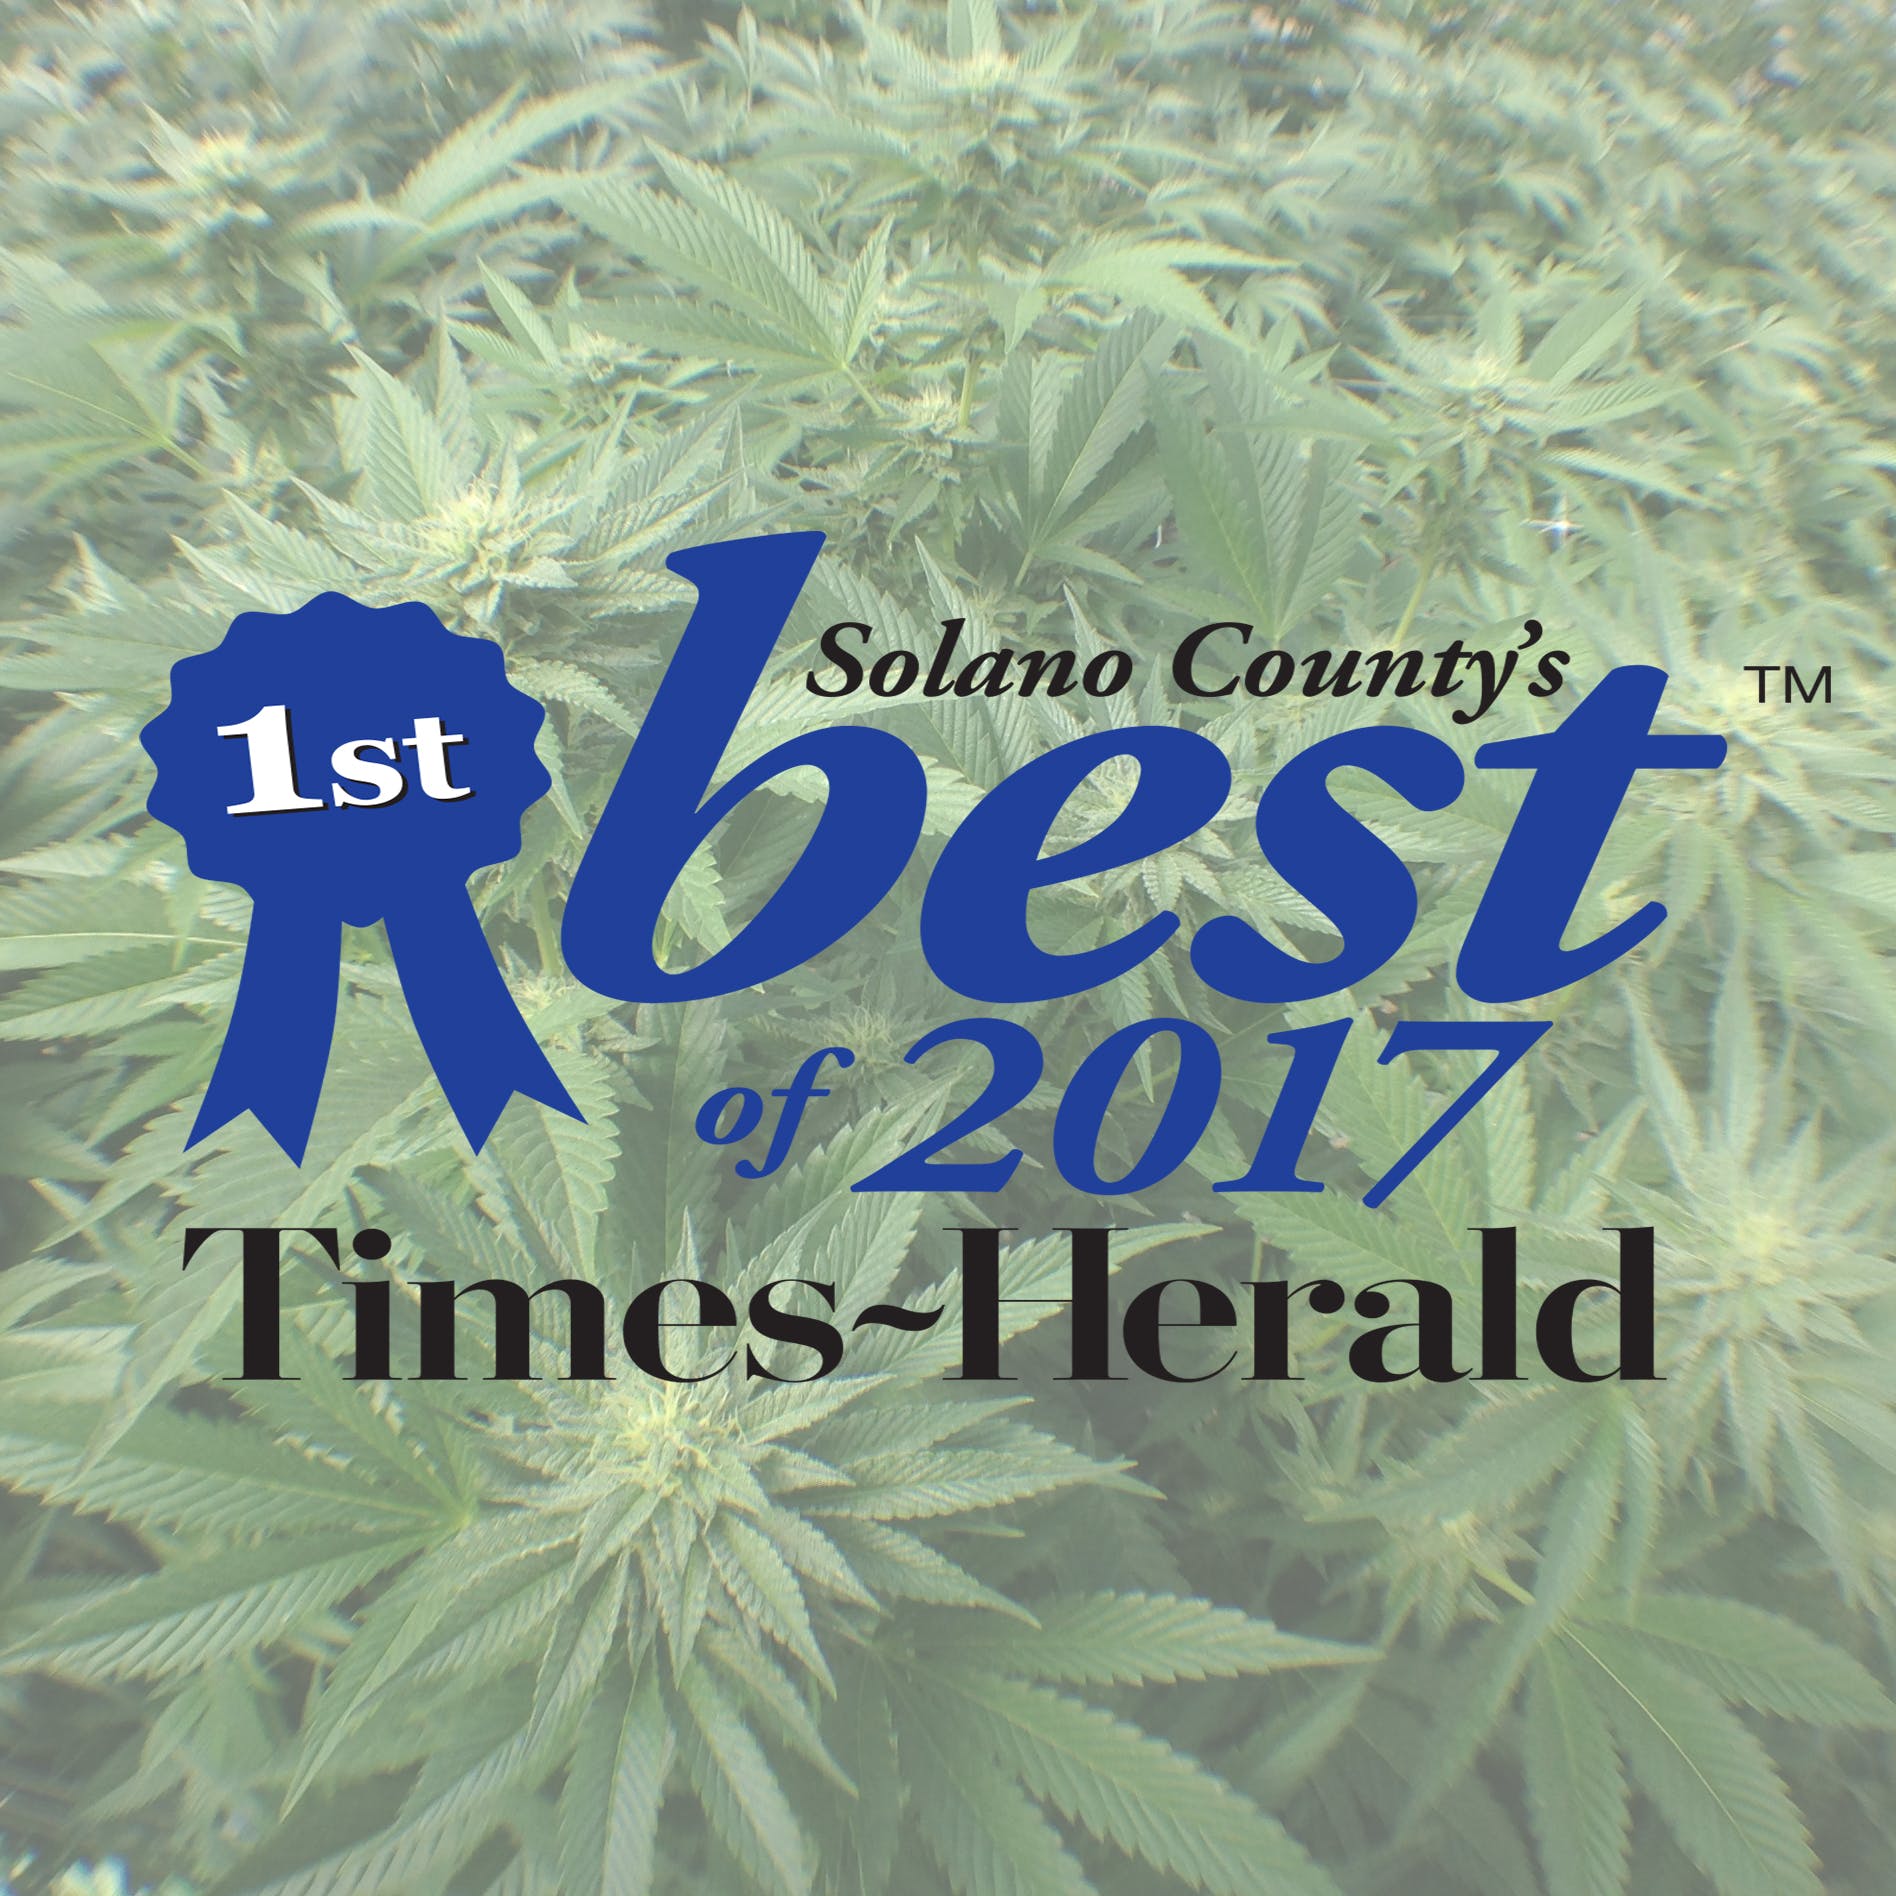 Voted Vallejo's #1 Medical Cannabis Safe Access Point!